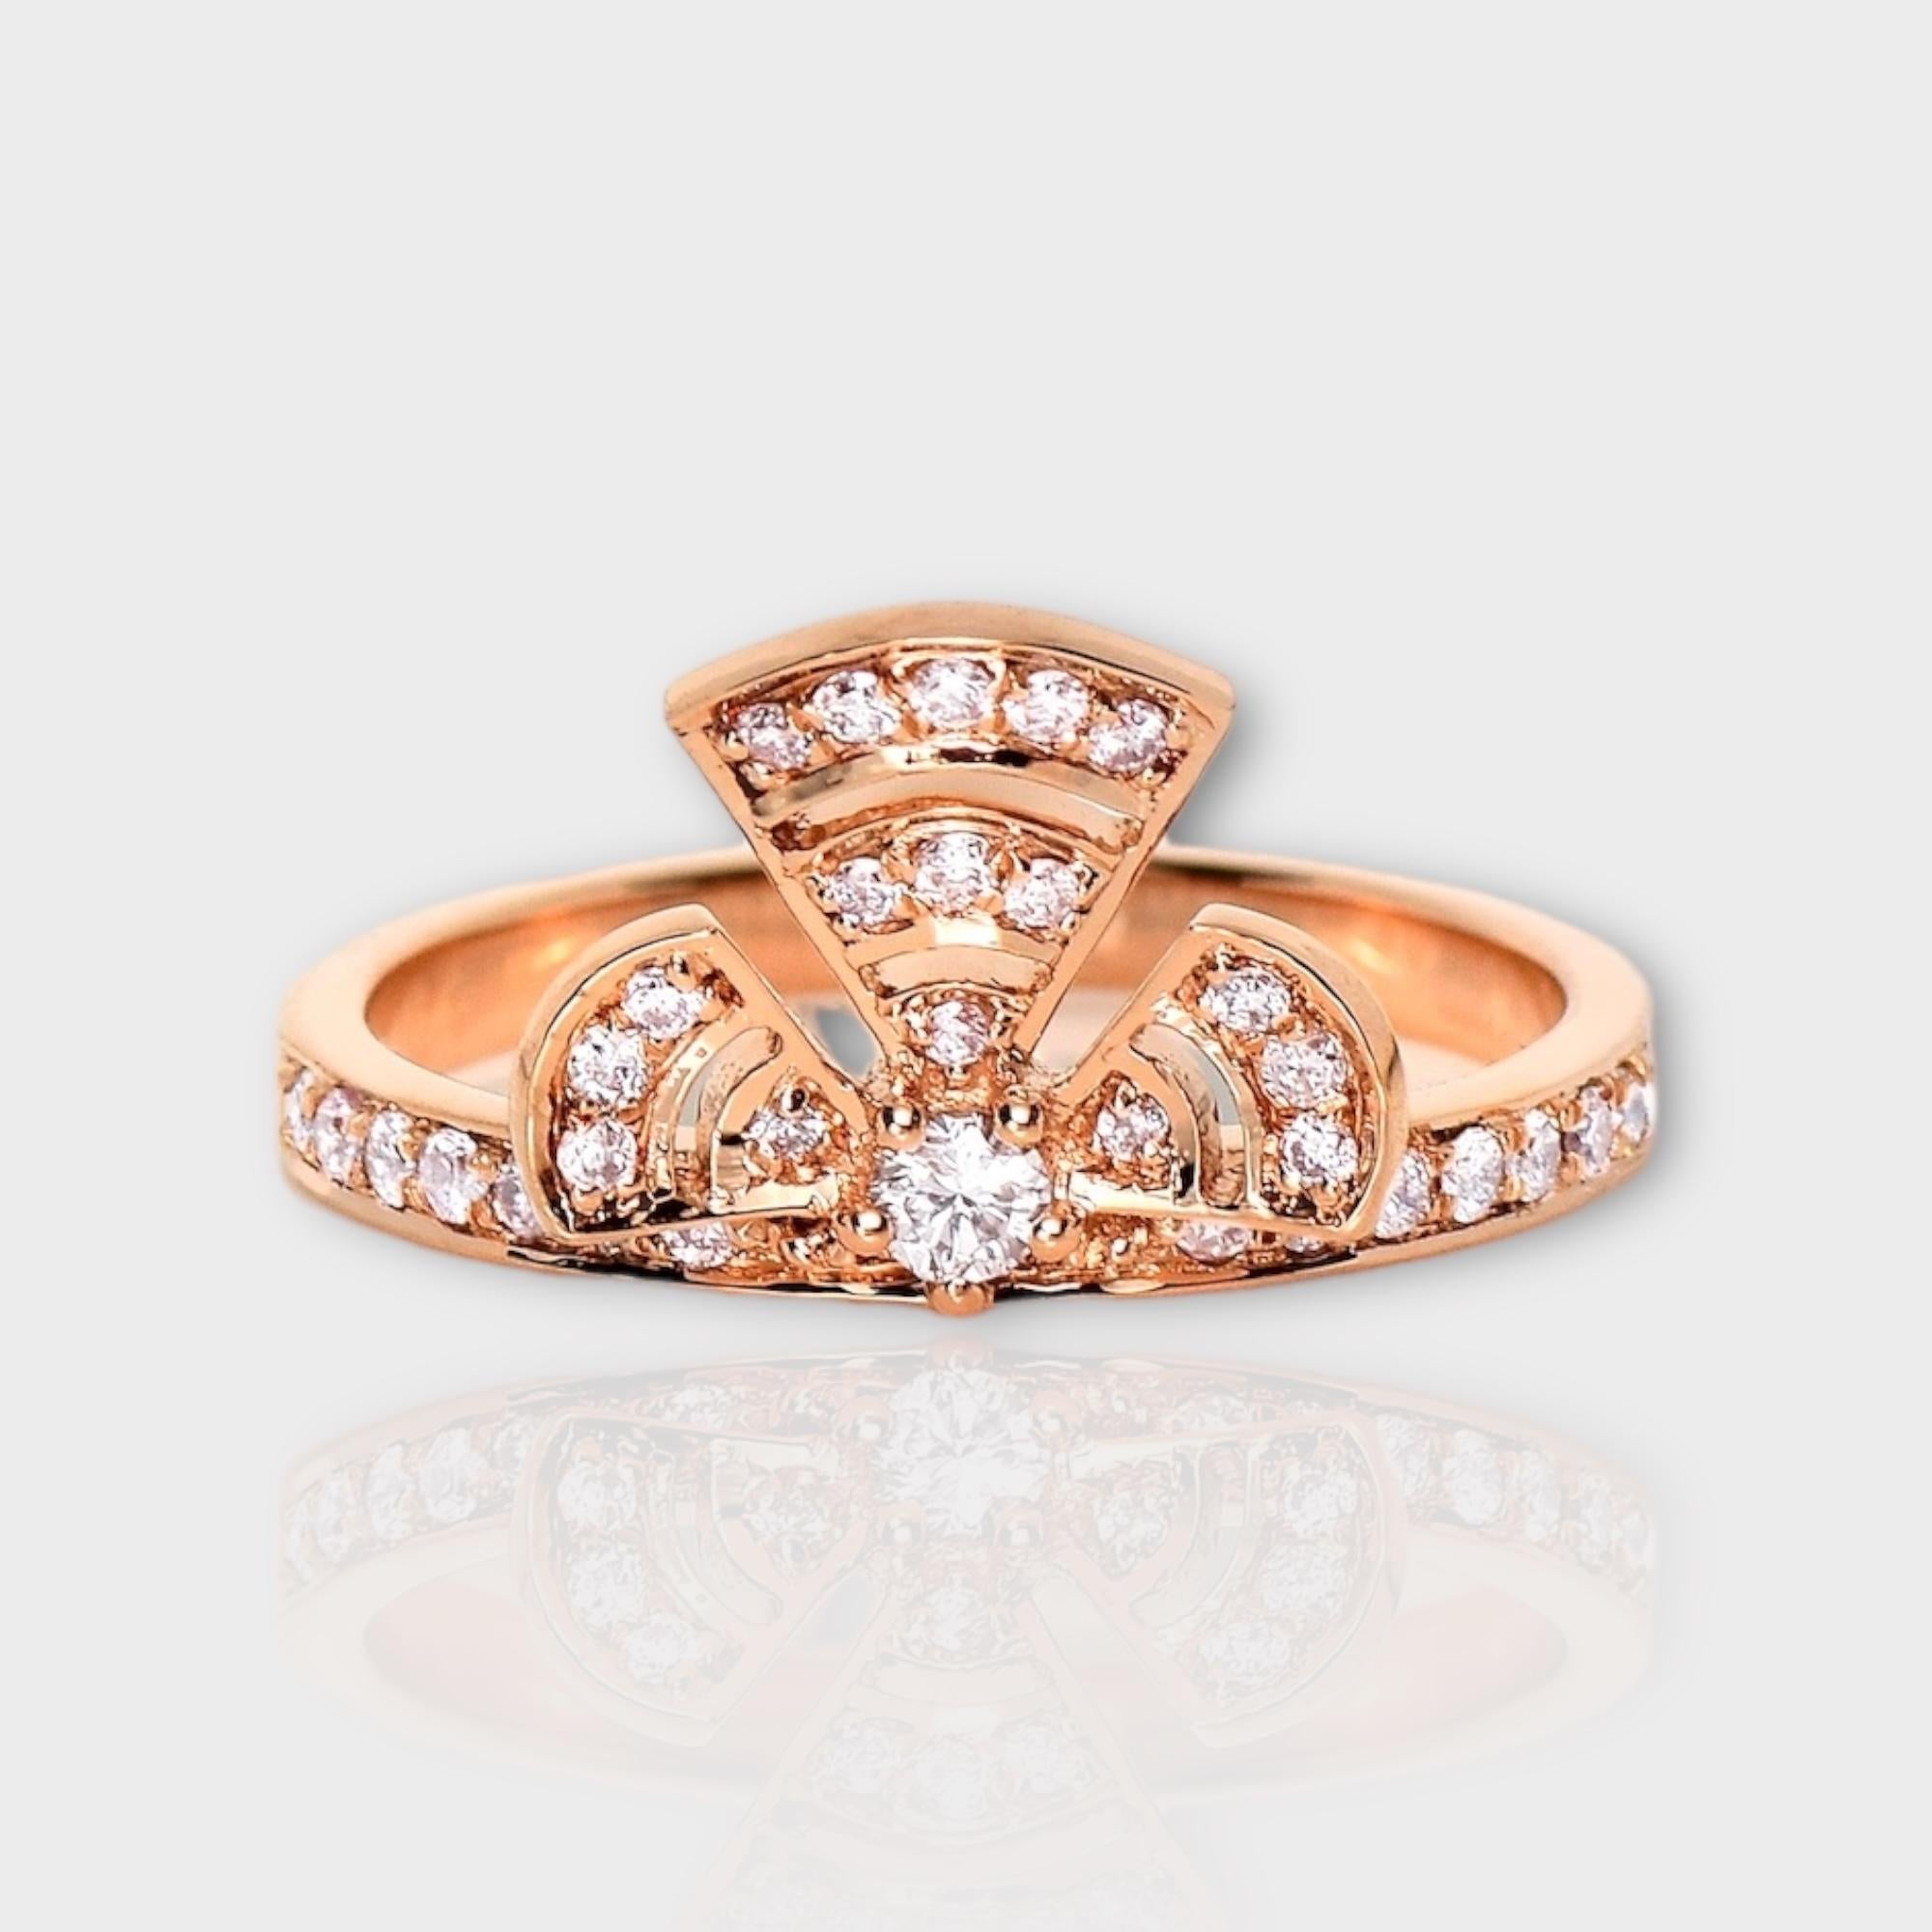 *IGI 14K 0.30 ct Natural Pink Diamonds Art Deco Design Engagement Ring*

This band features a stunning design with an art deco crafted from 14K rose gold. It is set with natural pink diamonds weighing 0.30 carats.

This ring features colorful